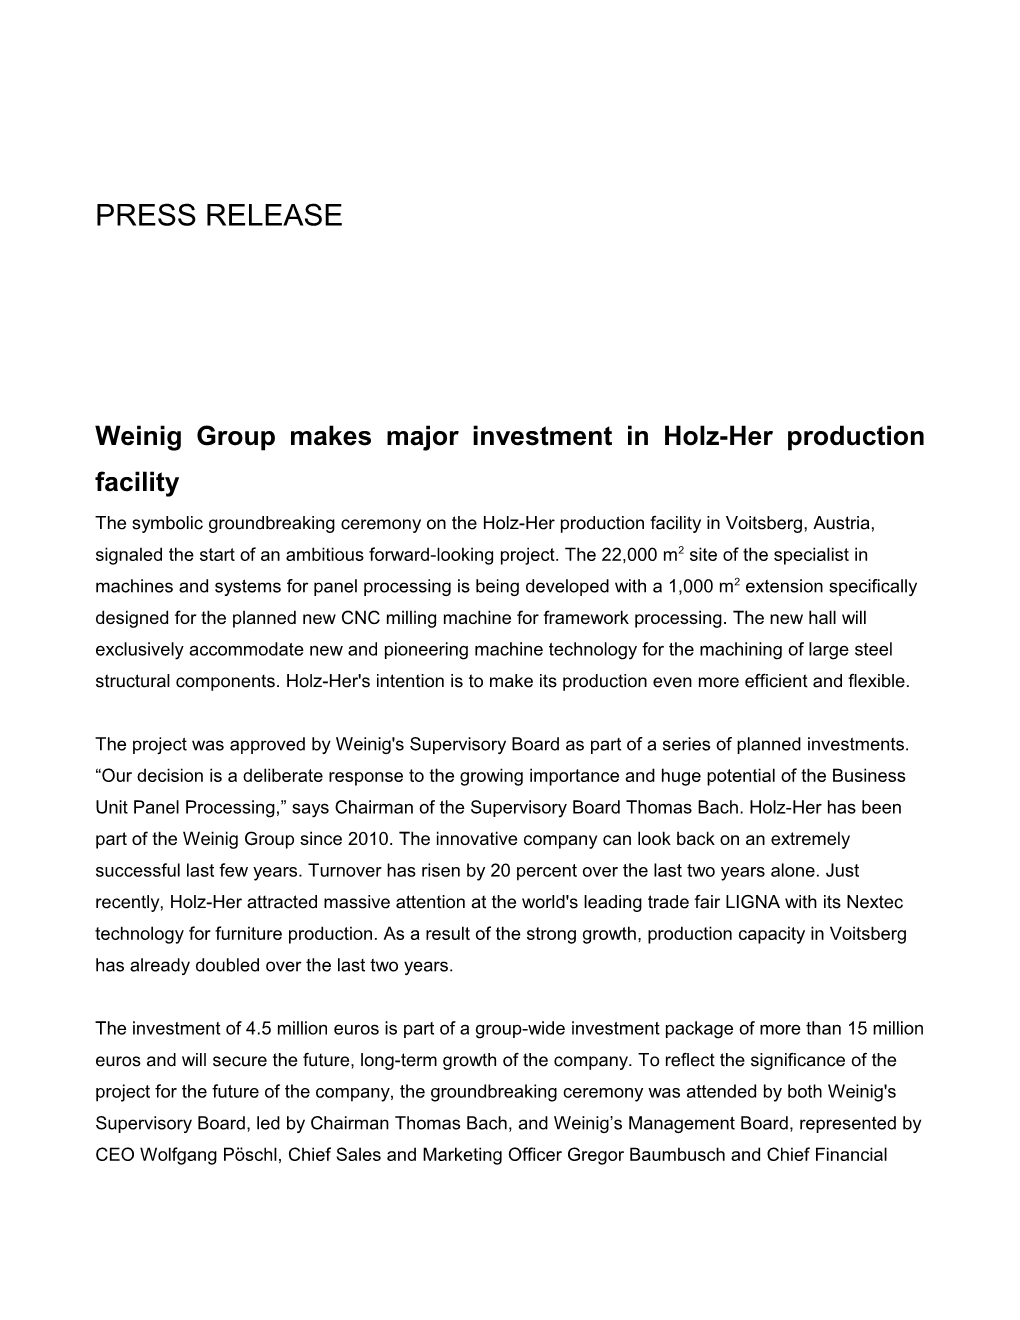 Weinig Group Makes Major Investment in Holz-Her Production Facility